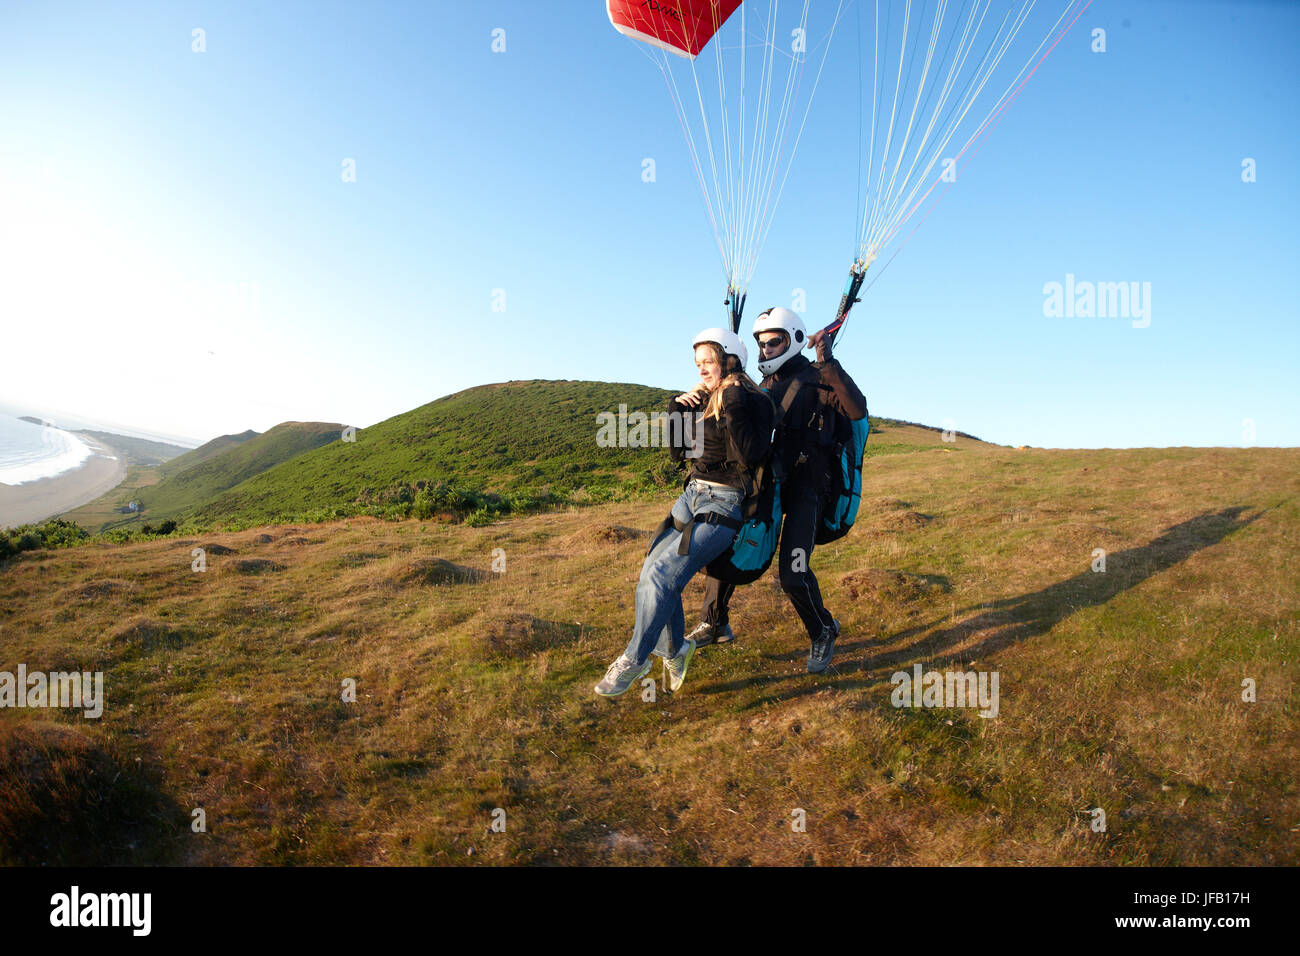 Tandem Paragliders taking off above the beach. Stock Photo